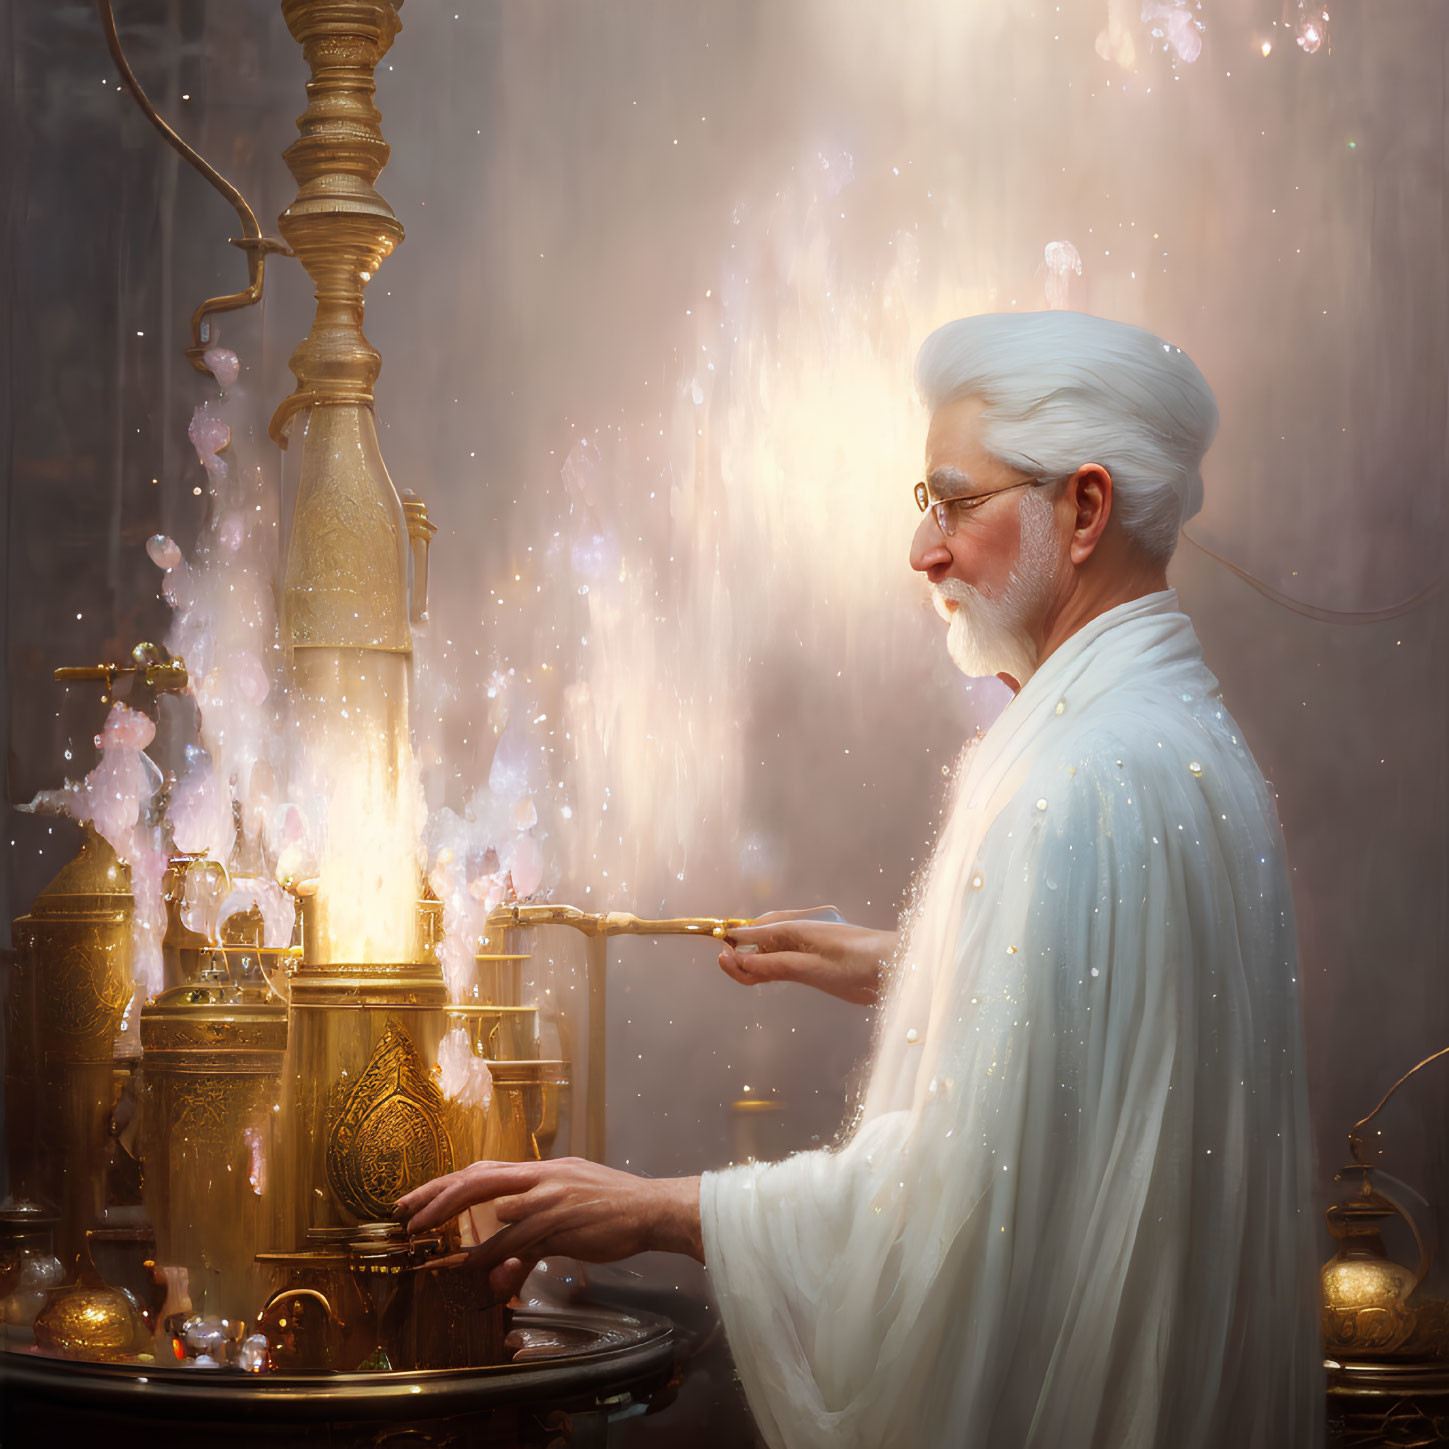 Elderly man conducting alchemical experiment with wand and ornate apparatus